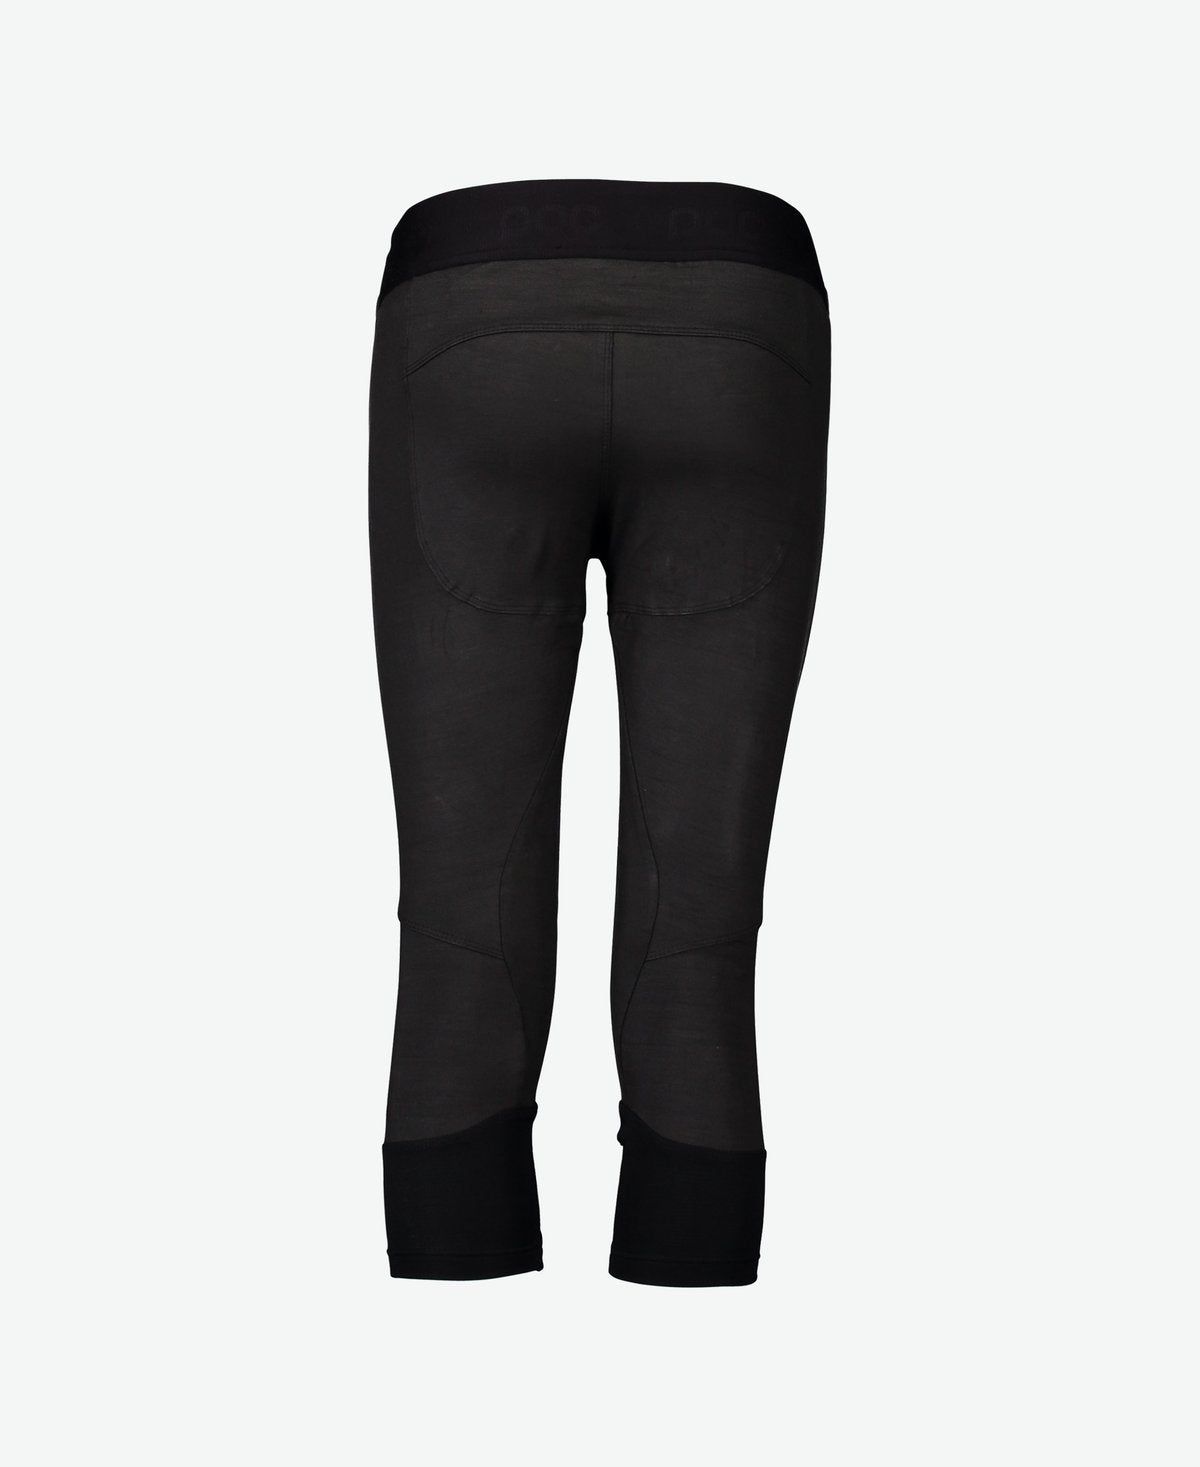 Resistance Layer Tights Jr - The Guides Hut